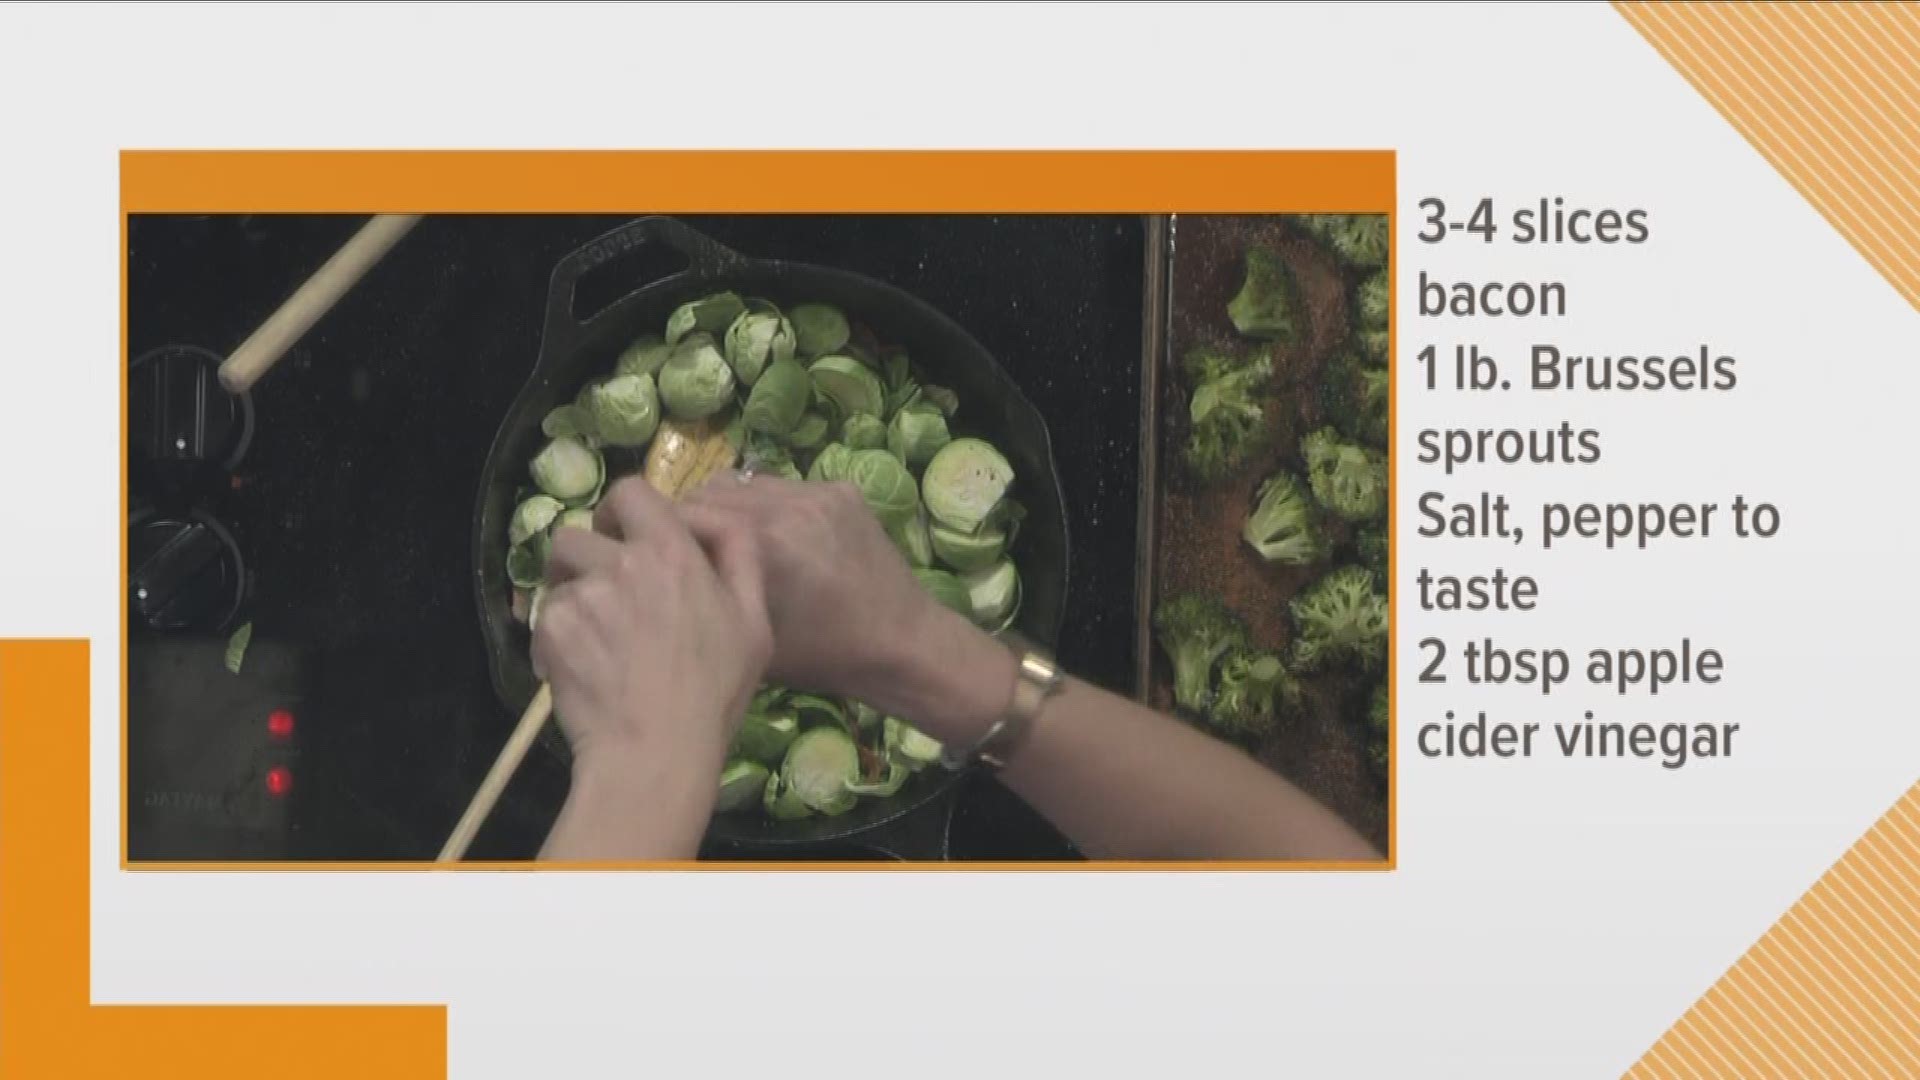 Angie Tillman with Blount Memorial Hospital shows three different, quick ways to prepare vegetables for your family.